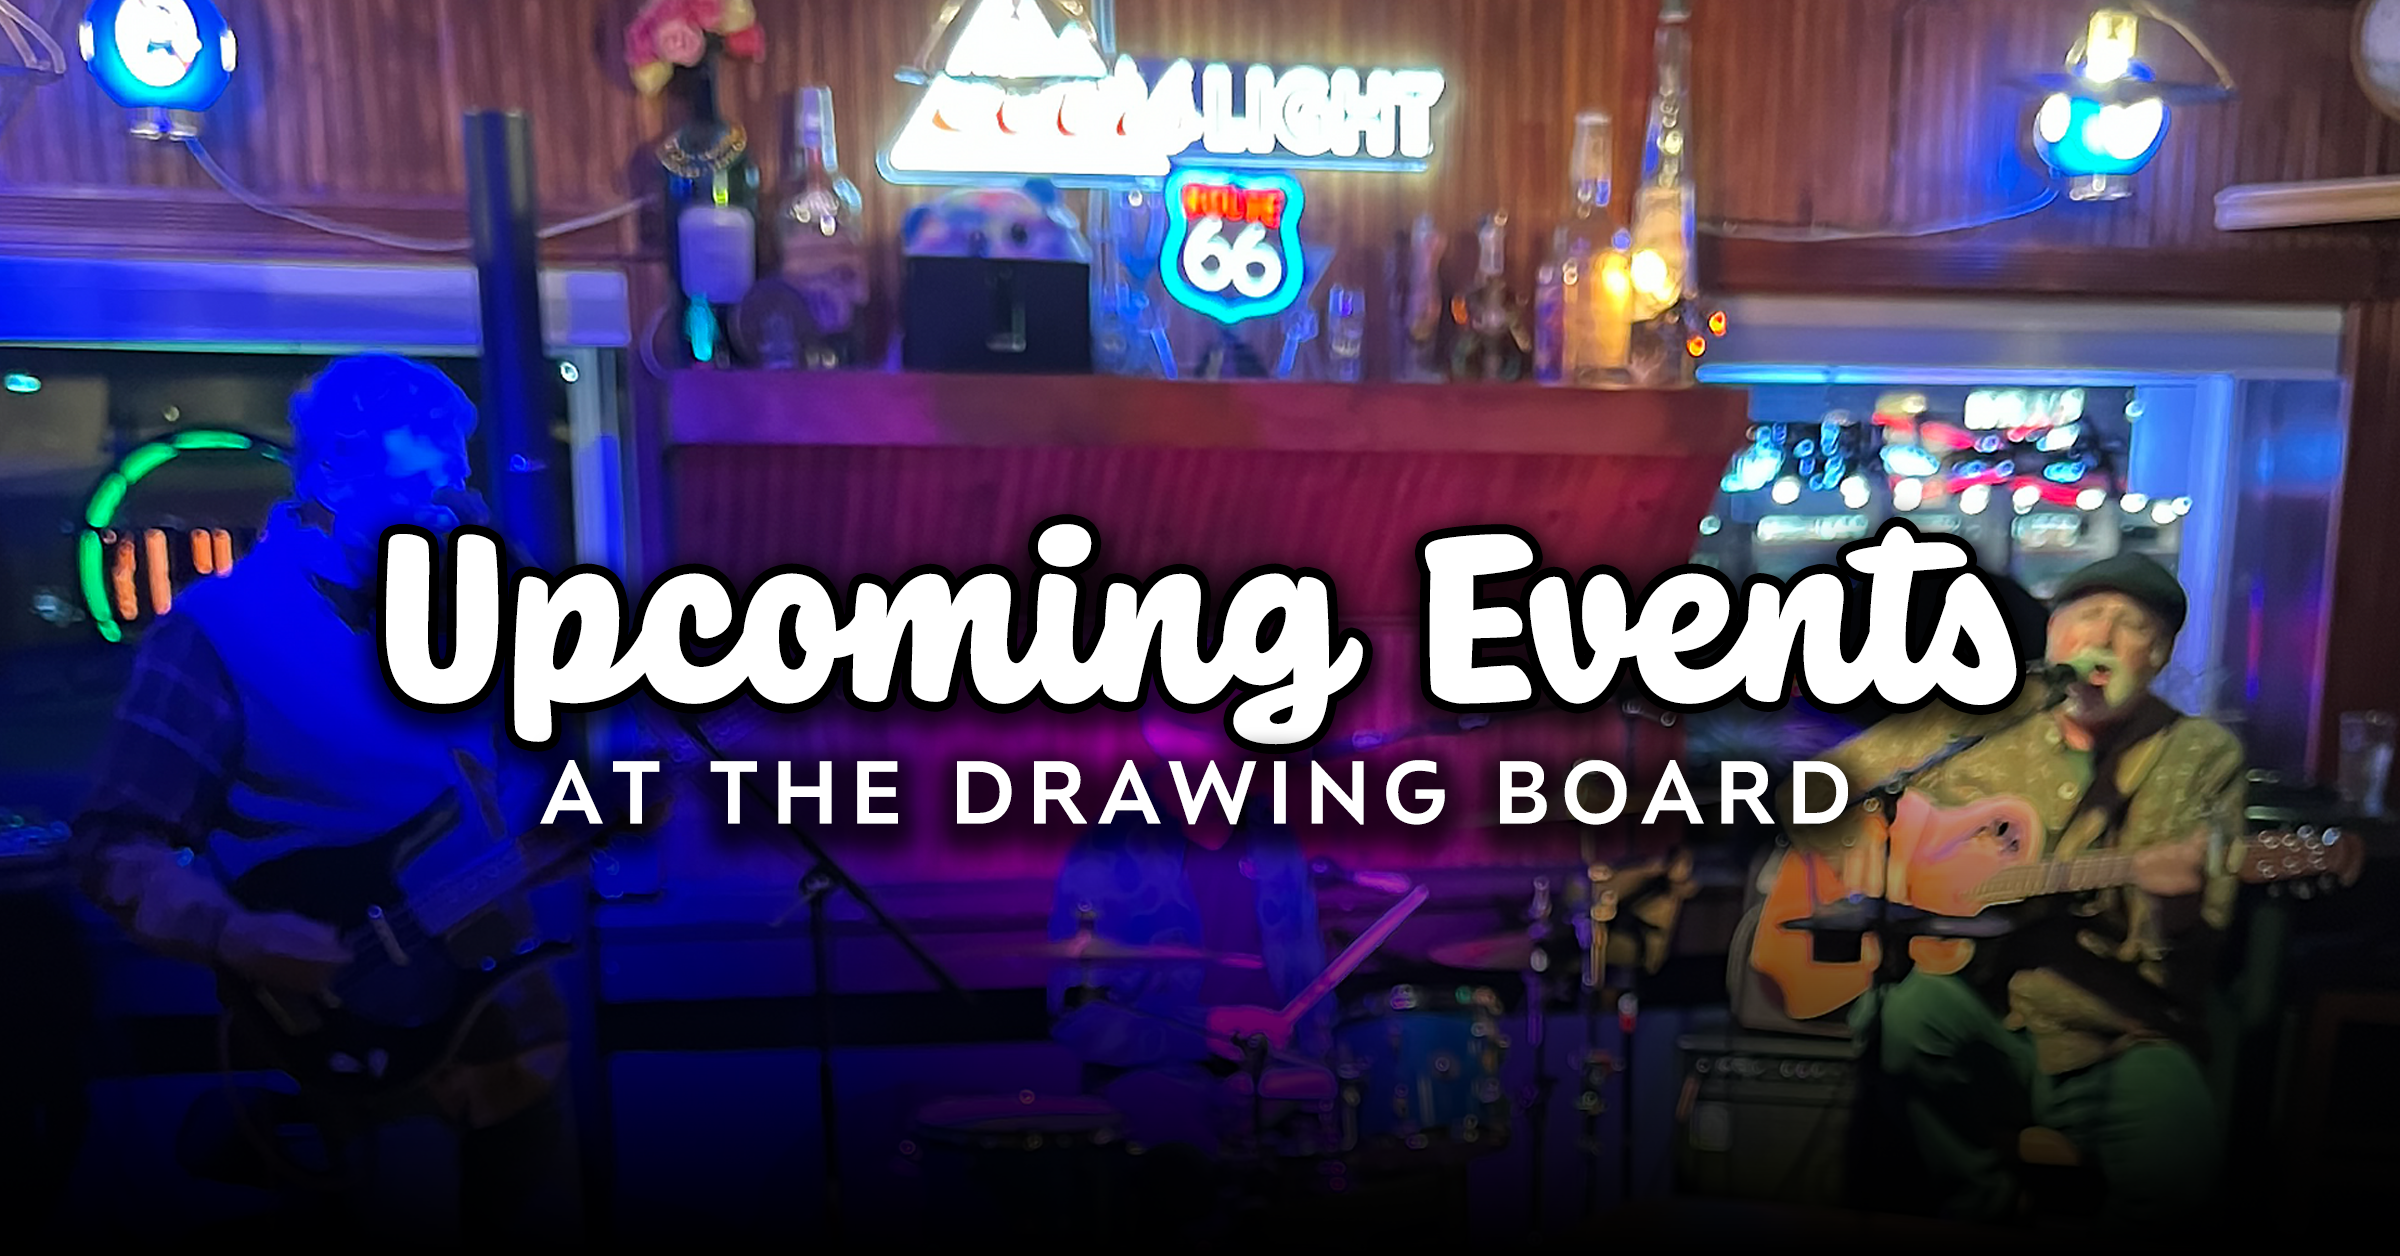 Upcoming Events at The Drawing Board